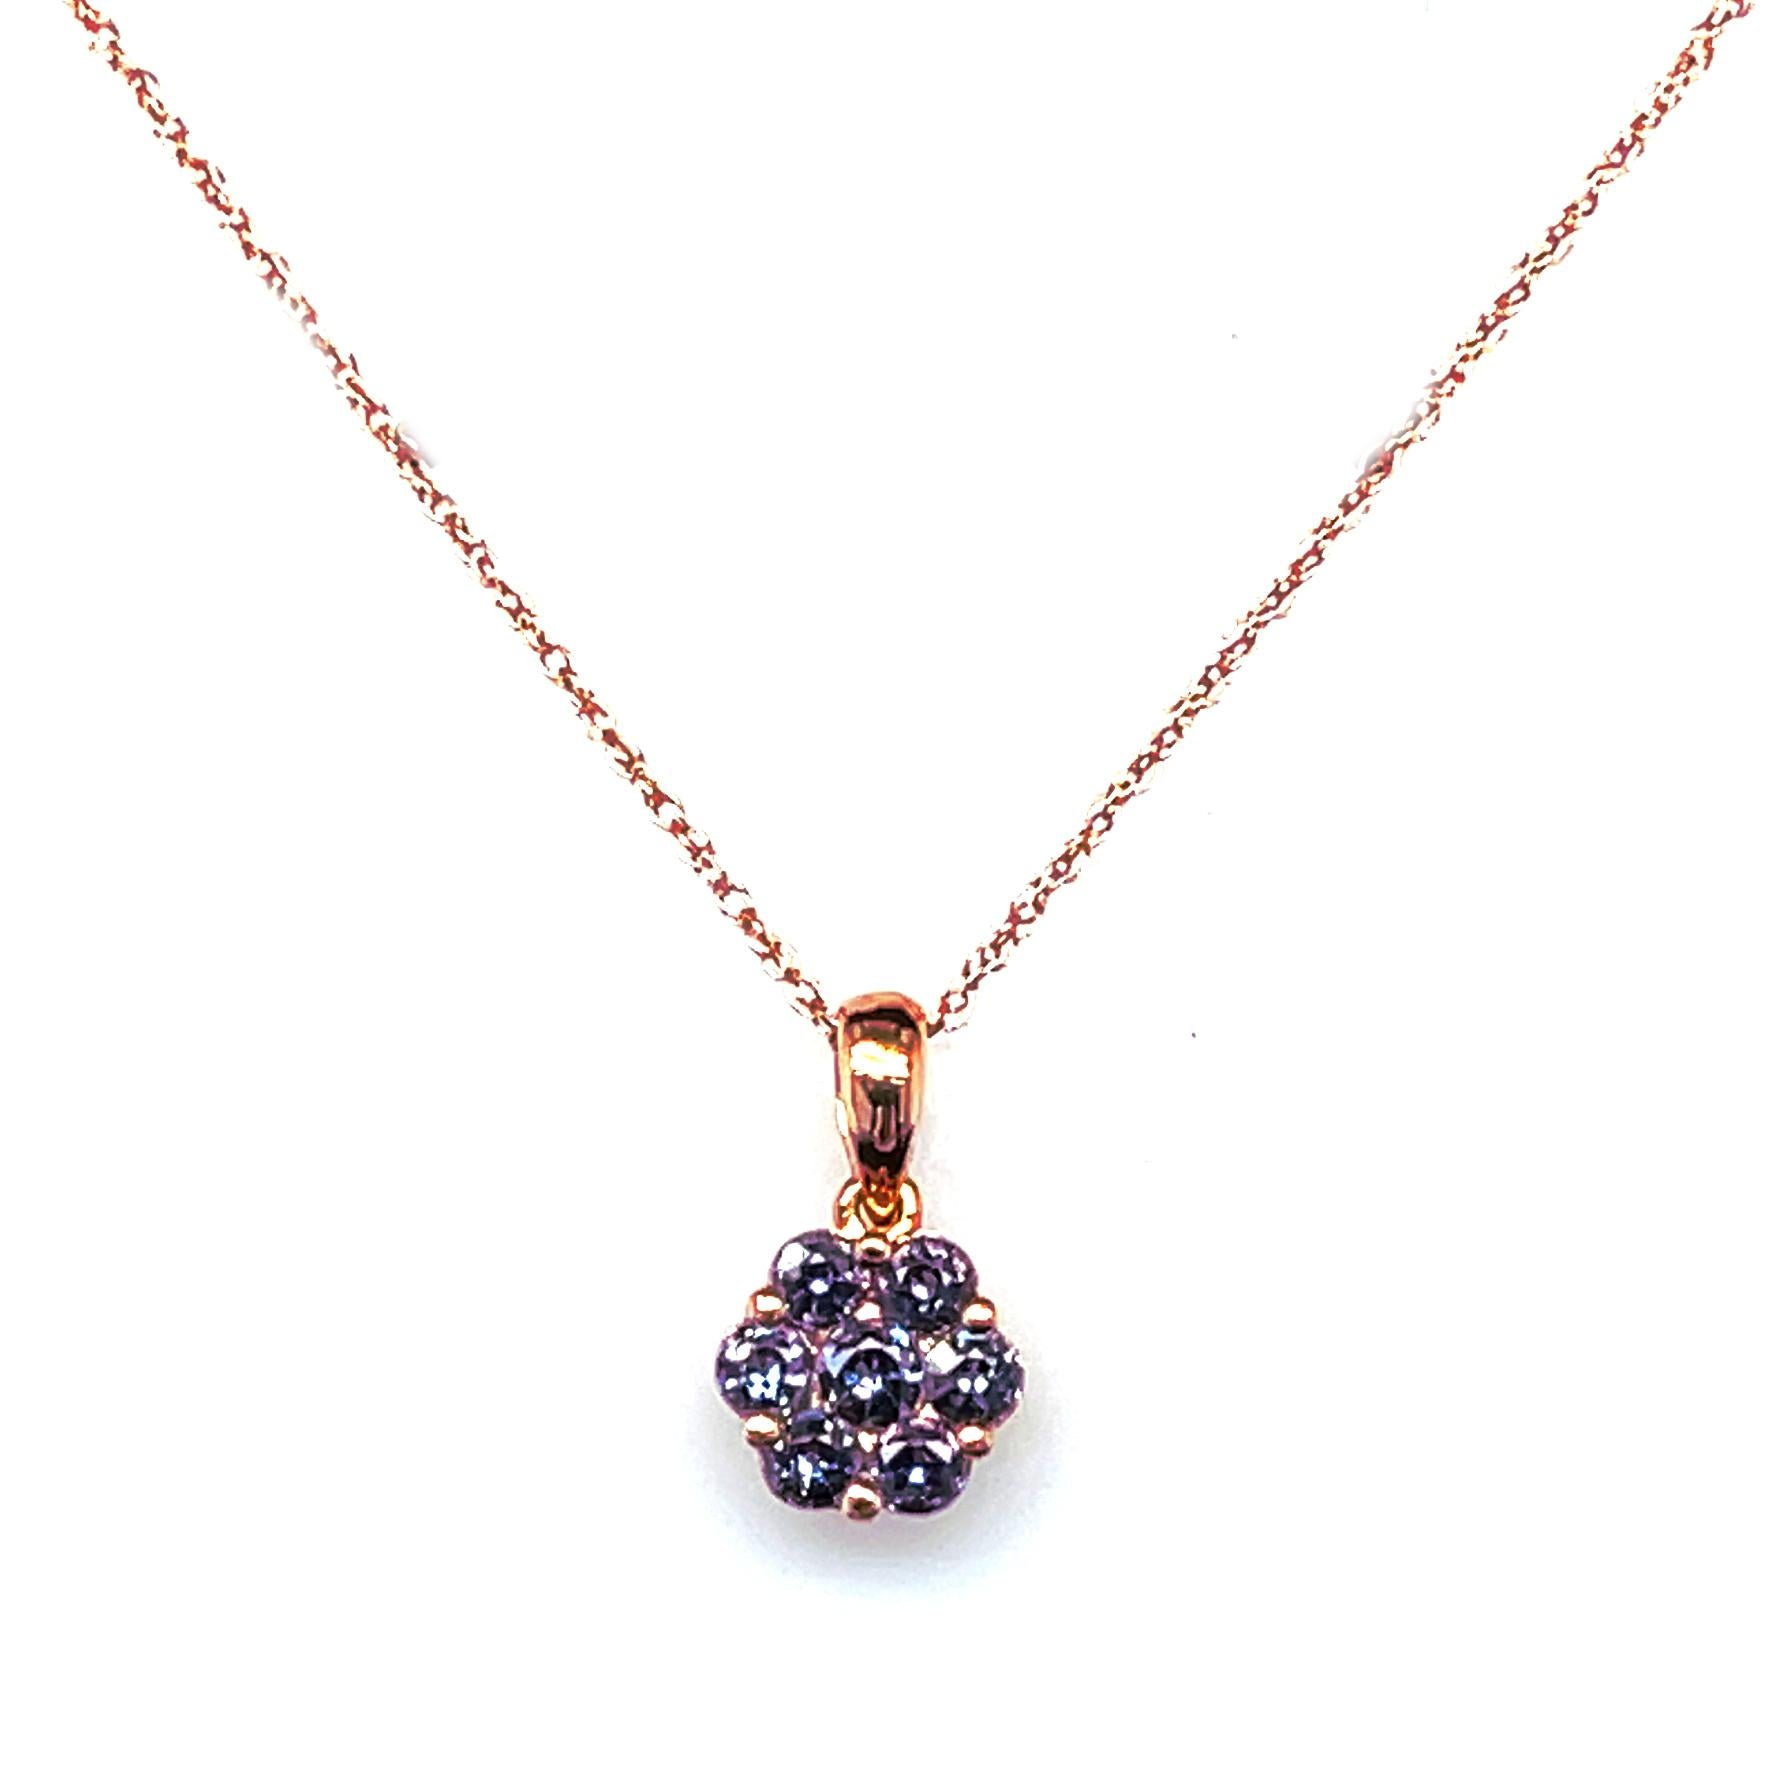 This beautiful cluster pendant features round faceted alexandrites arranged in a lovely floral pattern and set in 14k yellow gold. Alexandrites, the phenomenal color-change variety of chrysoberyl, are extremely rare and are among the most valued